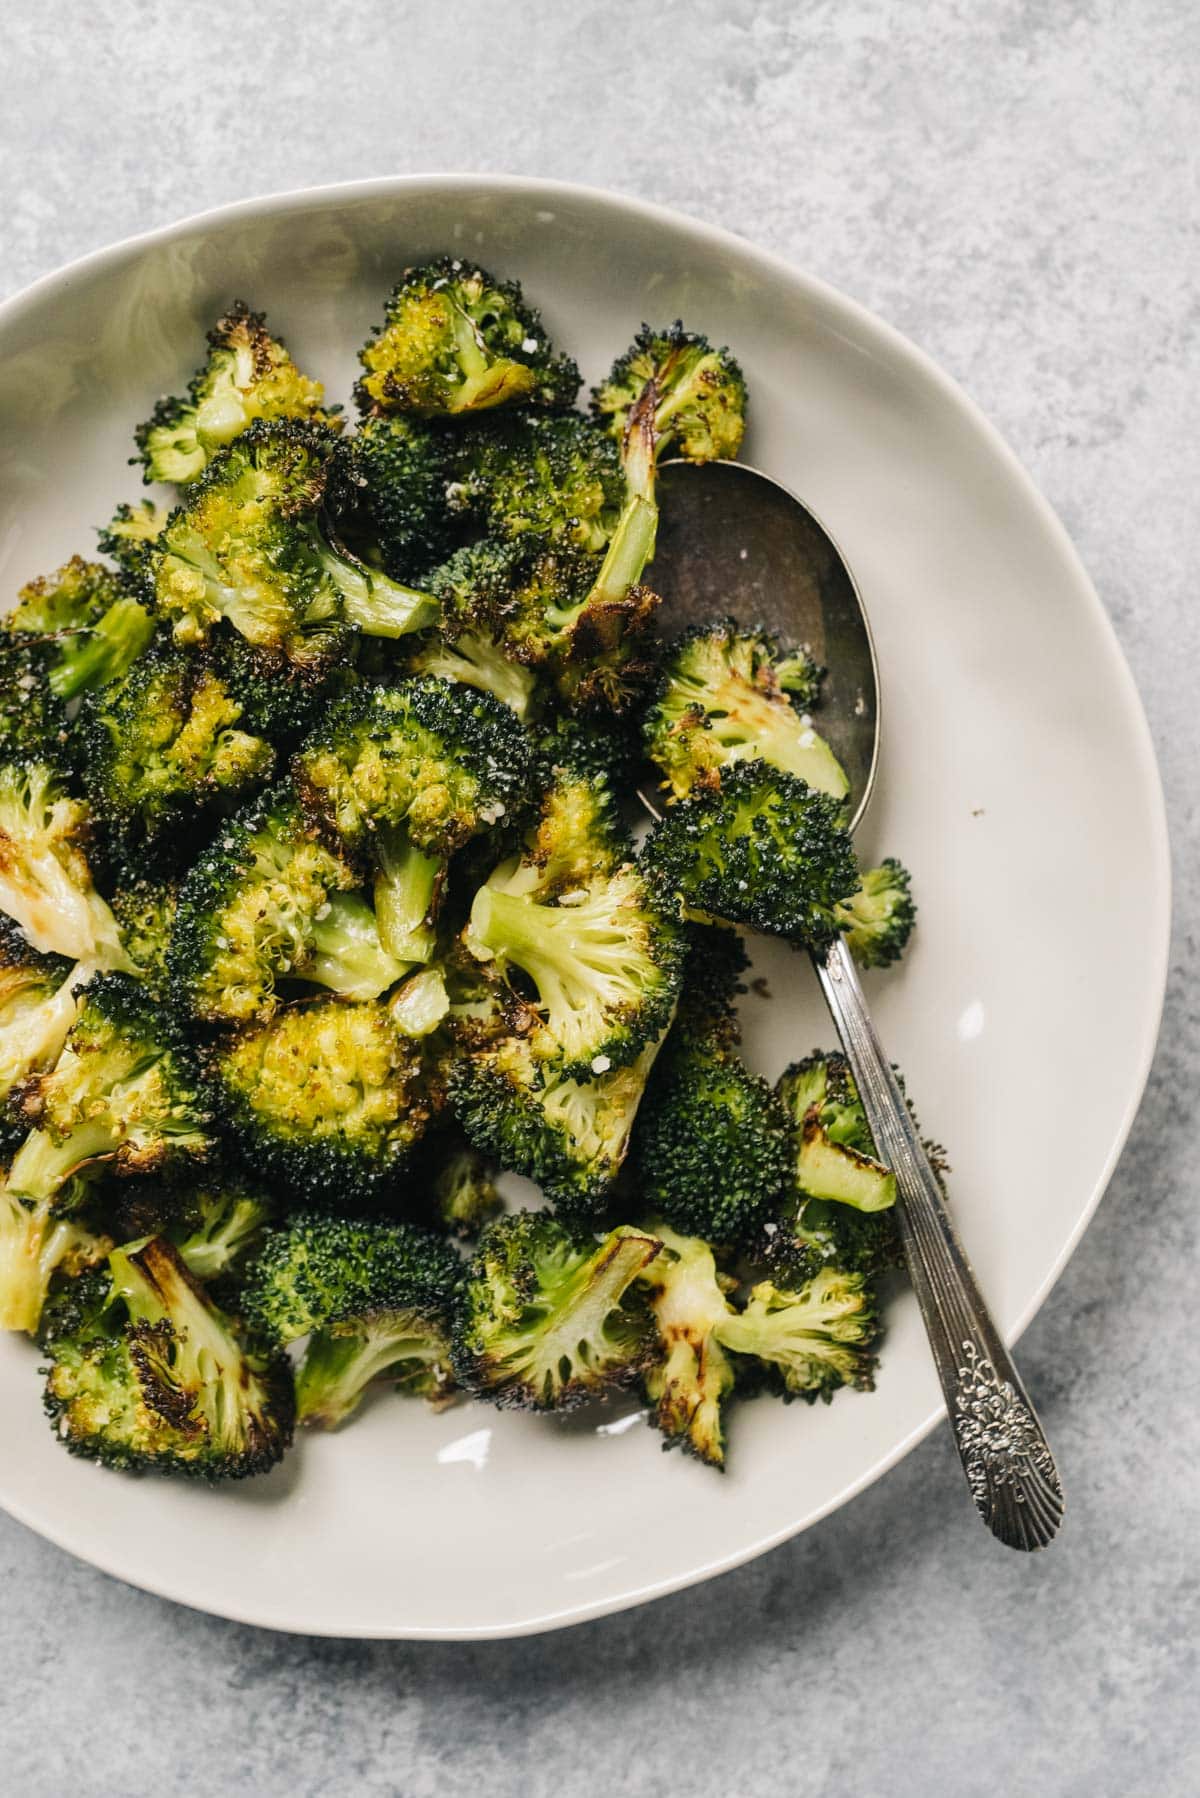 A bowl of roasted broccoli with a silver serving spoon on a concrete background.